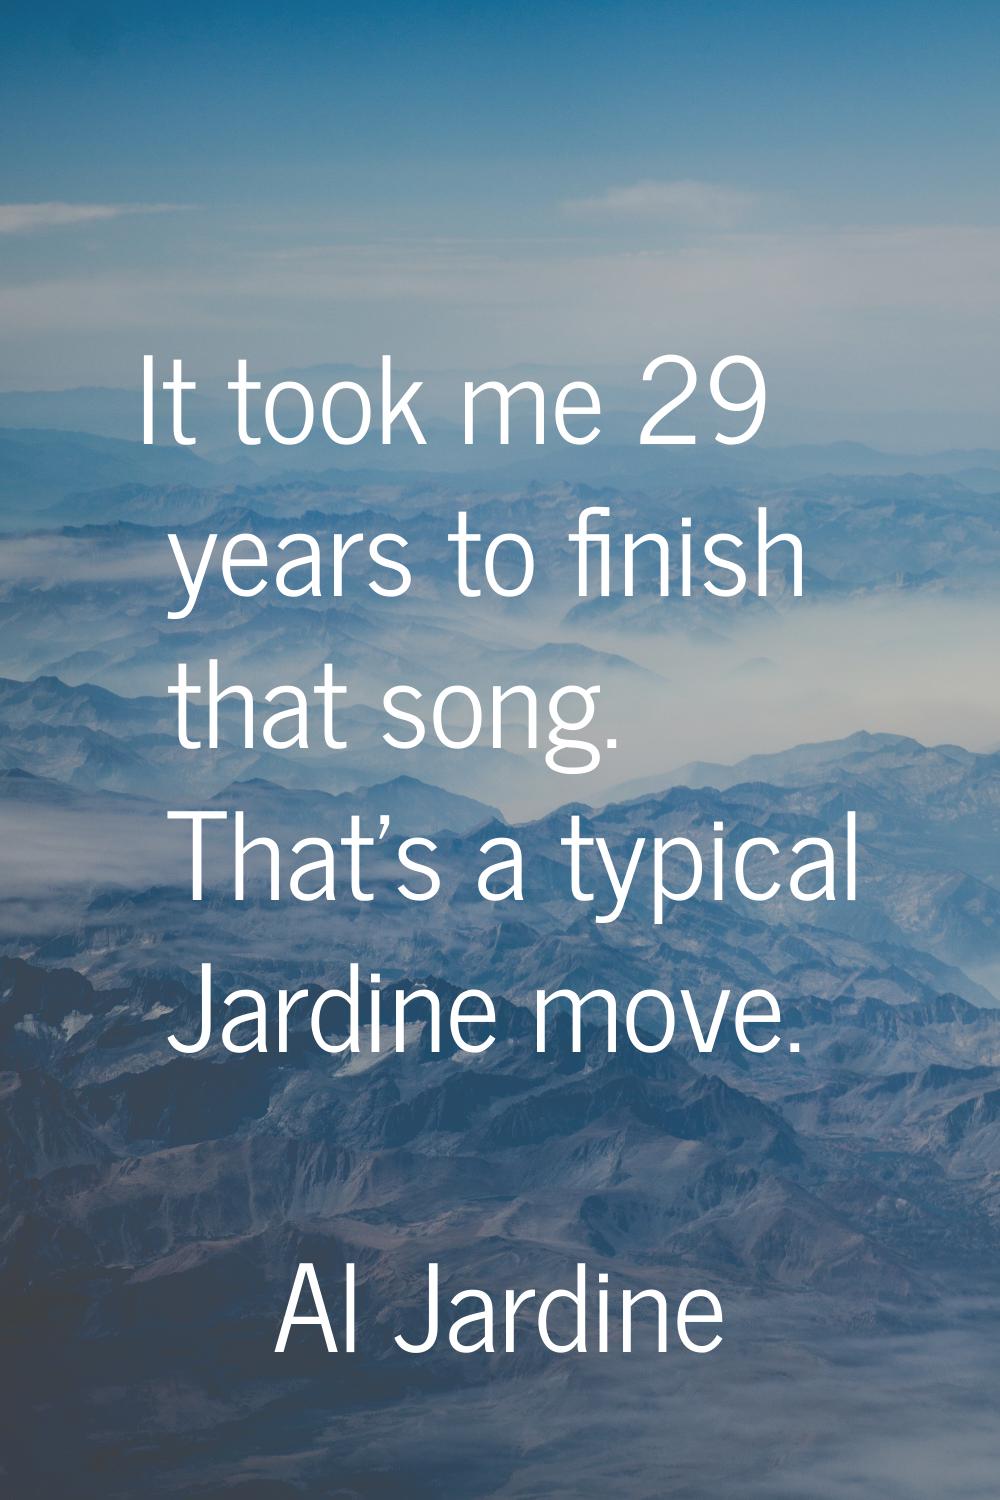 It took me 29 years to finish that song. That's a typical Jardine move.